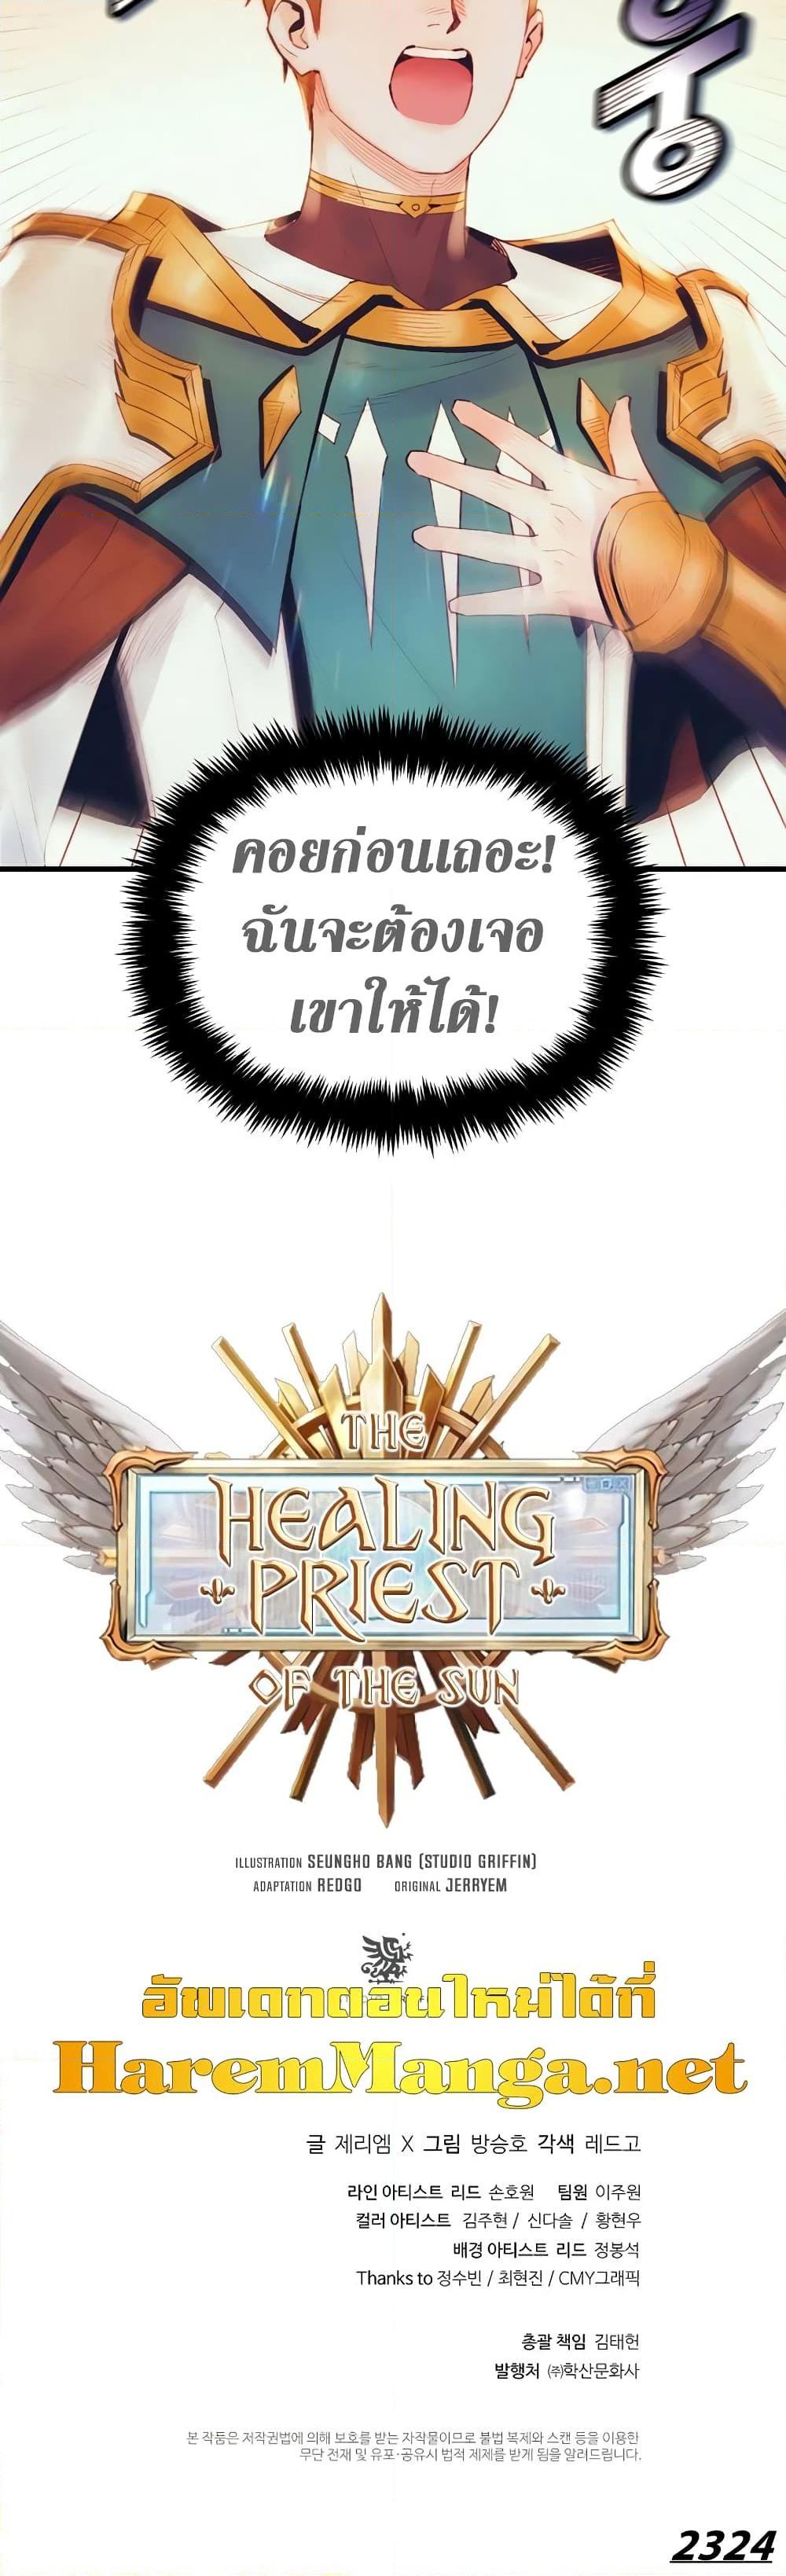 The Healing Priest of the Sun 38 (41)